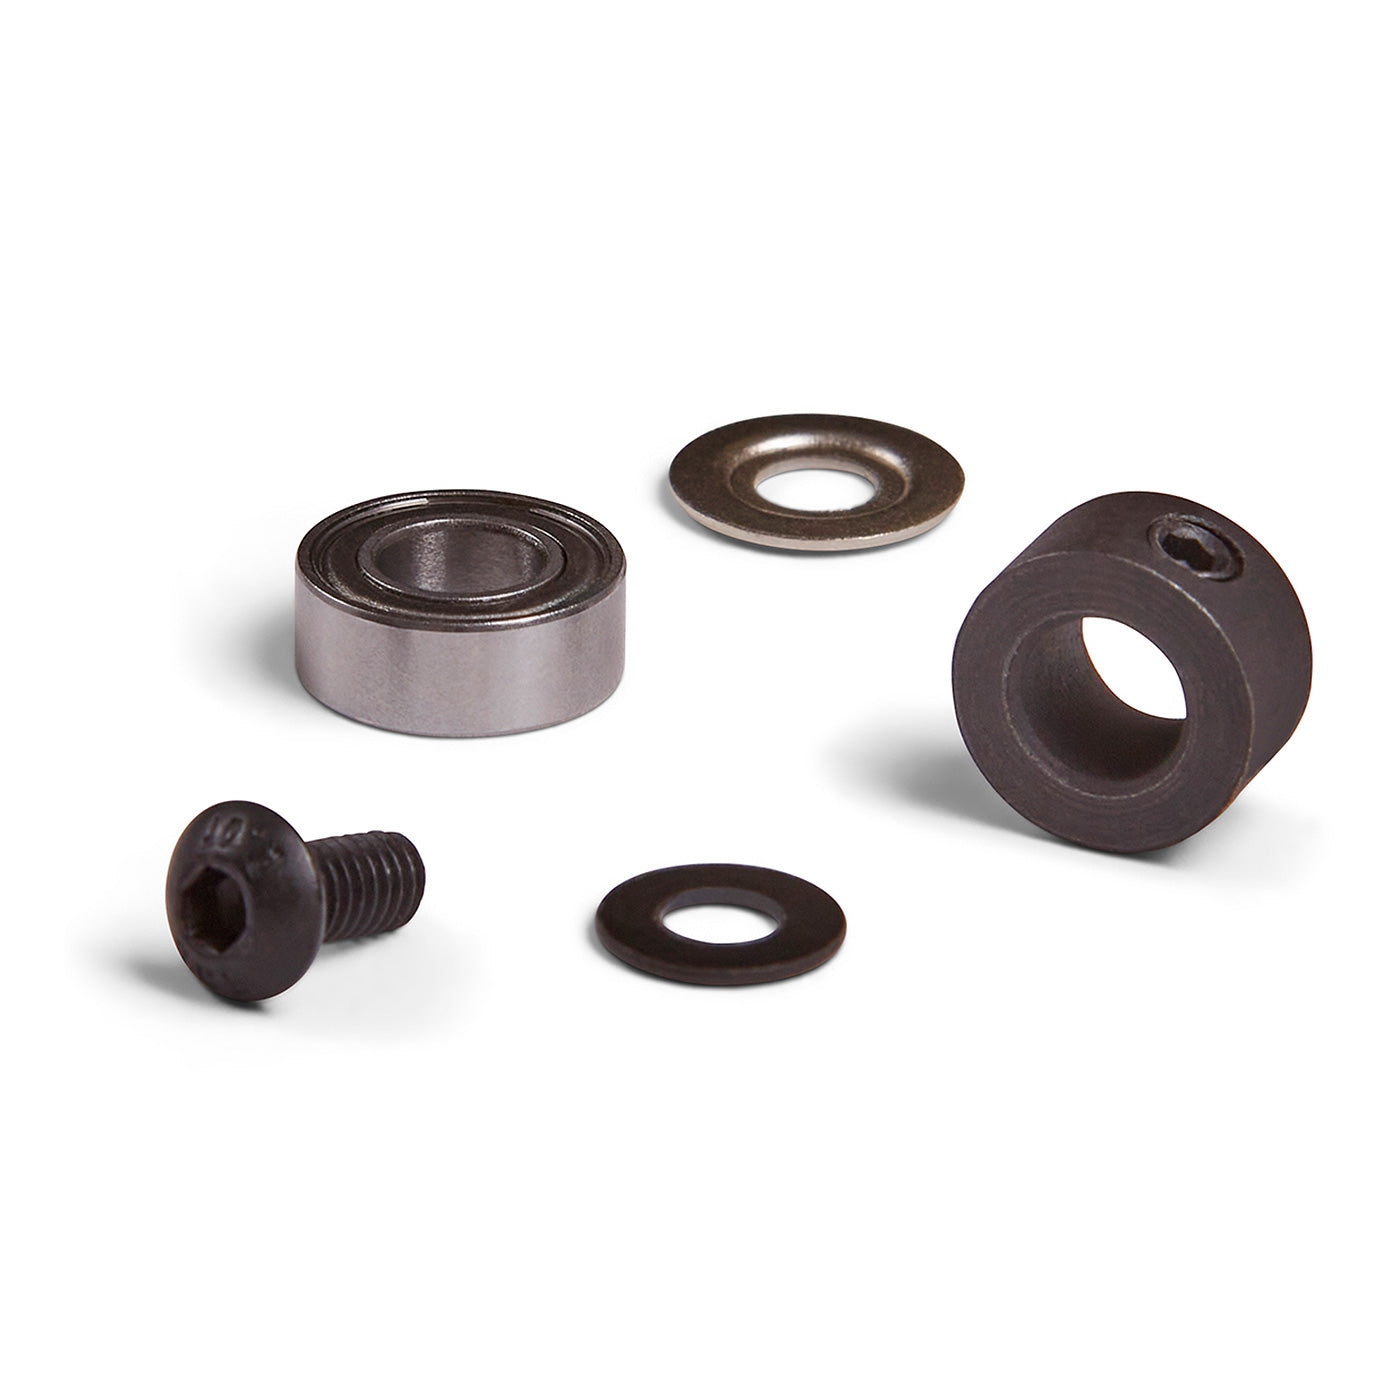 Bearing Kit for R5648, R5649, R5651, R5652, R5657 and R5658  